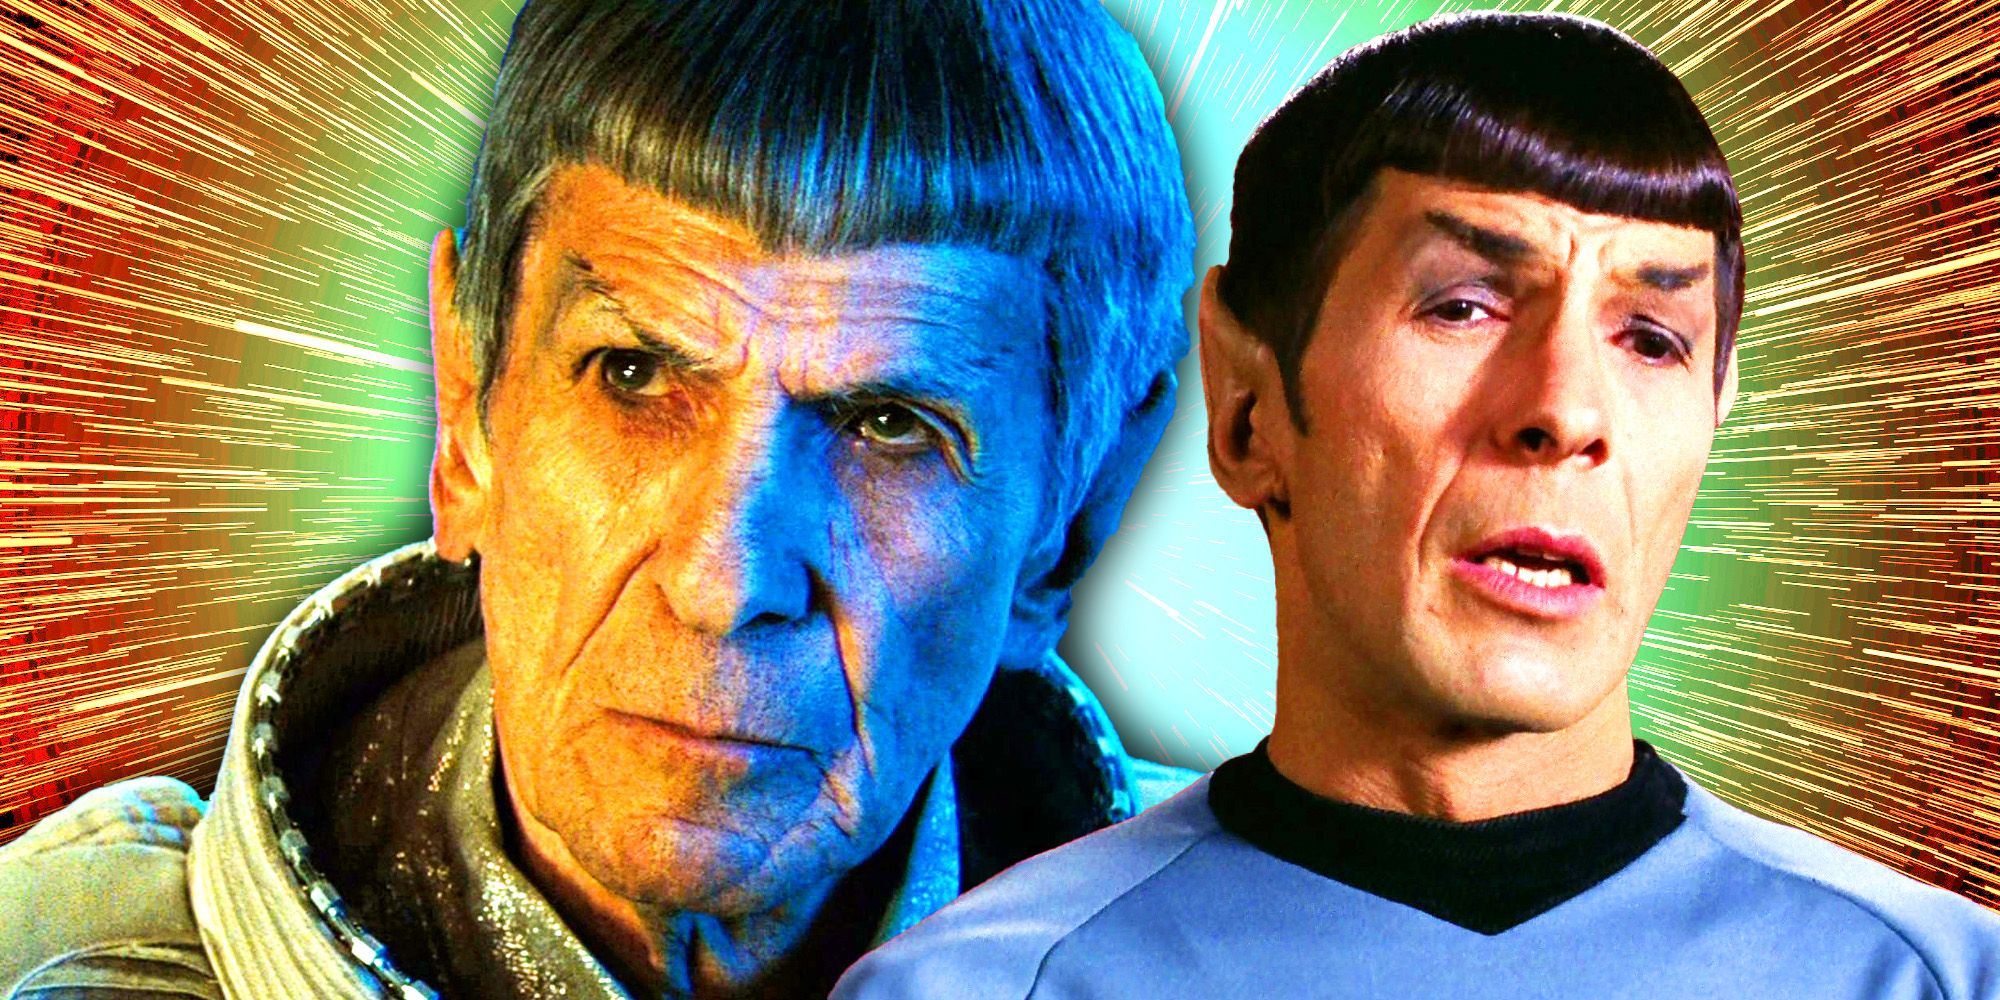 Image of Spock from the 2009 movie and the Original Series.